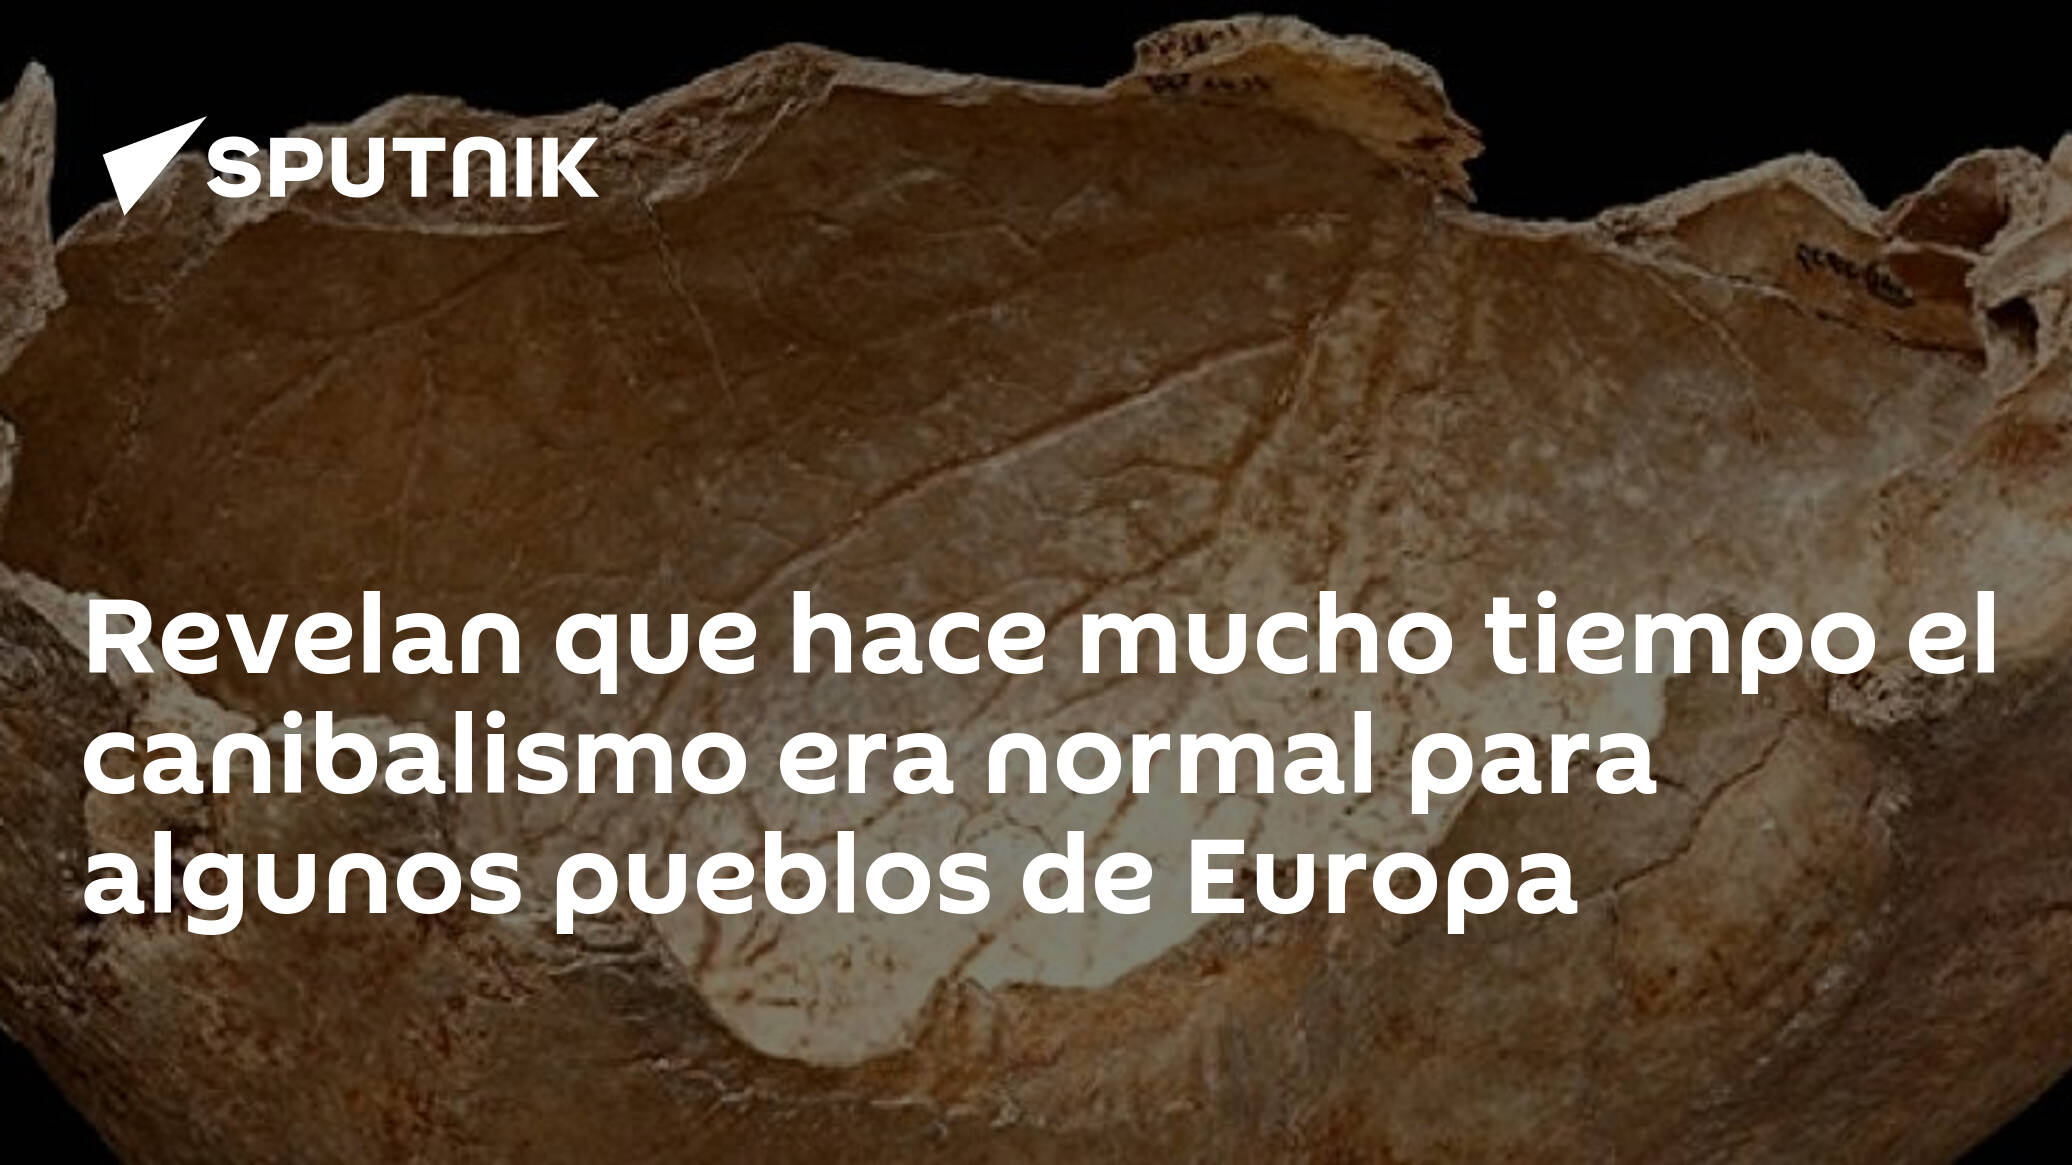 They reveal that cannibalism had long been normal for some peoples in Europe